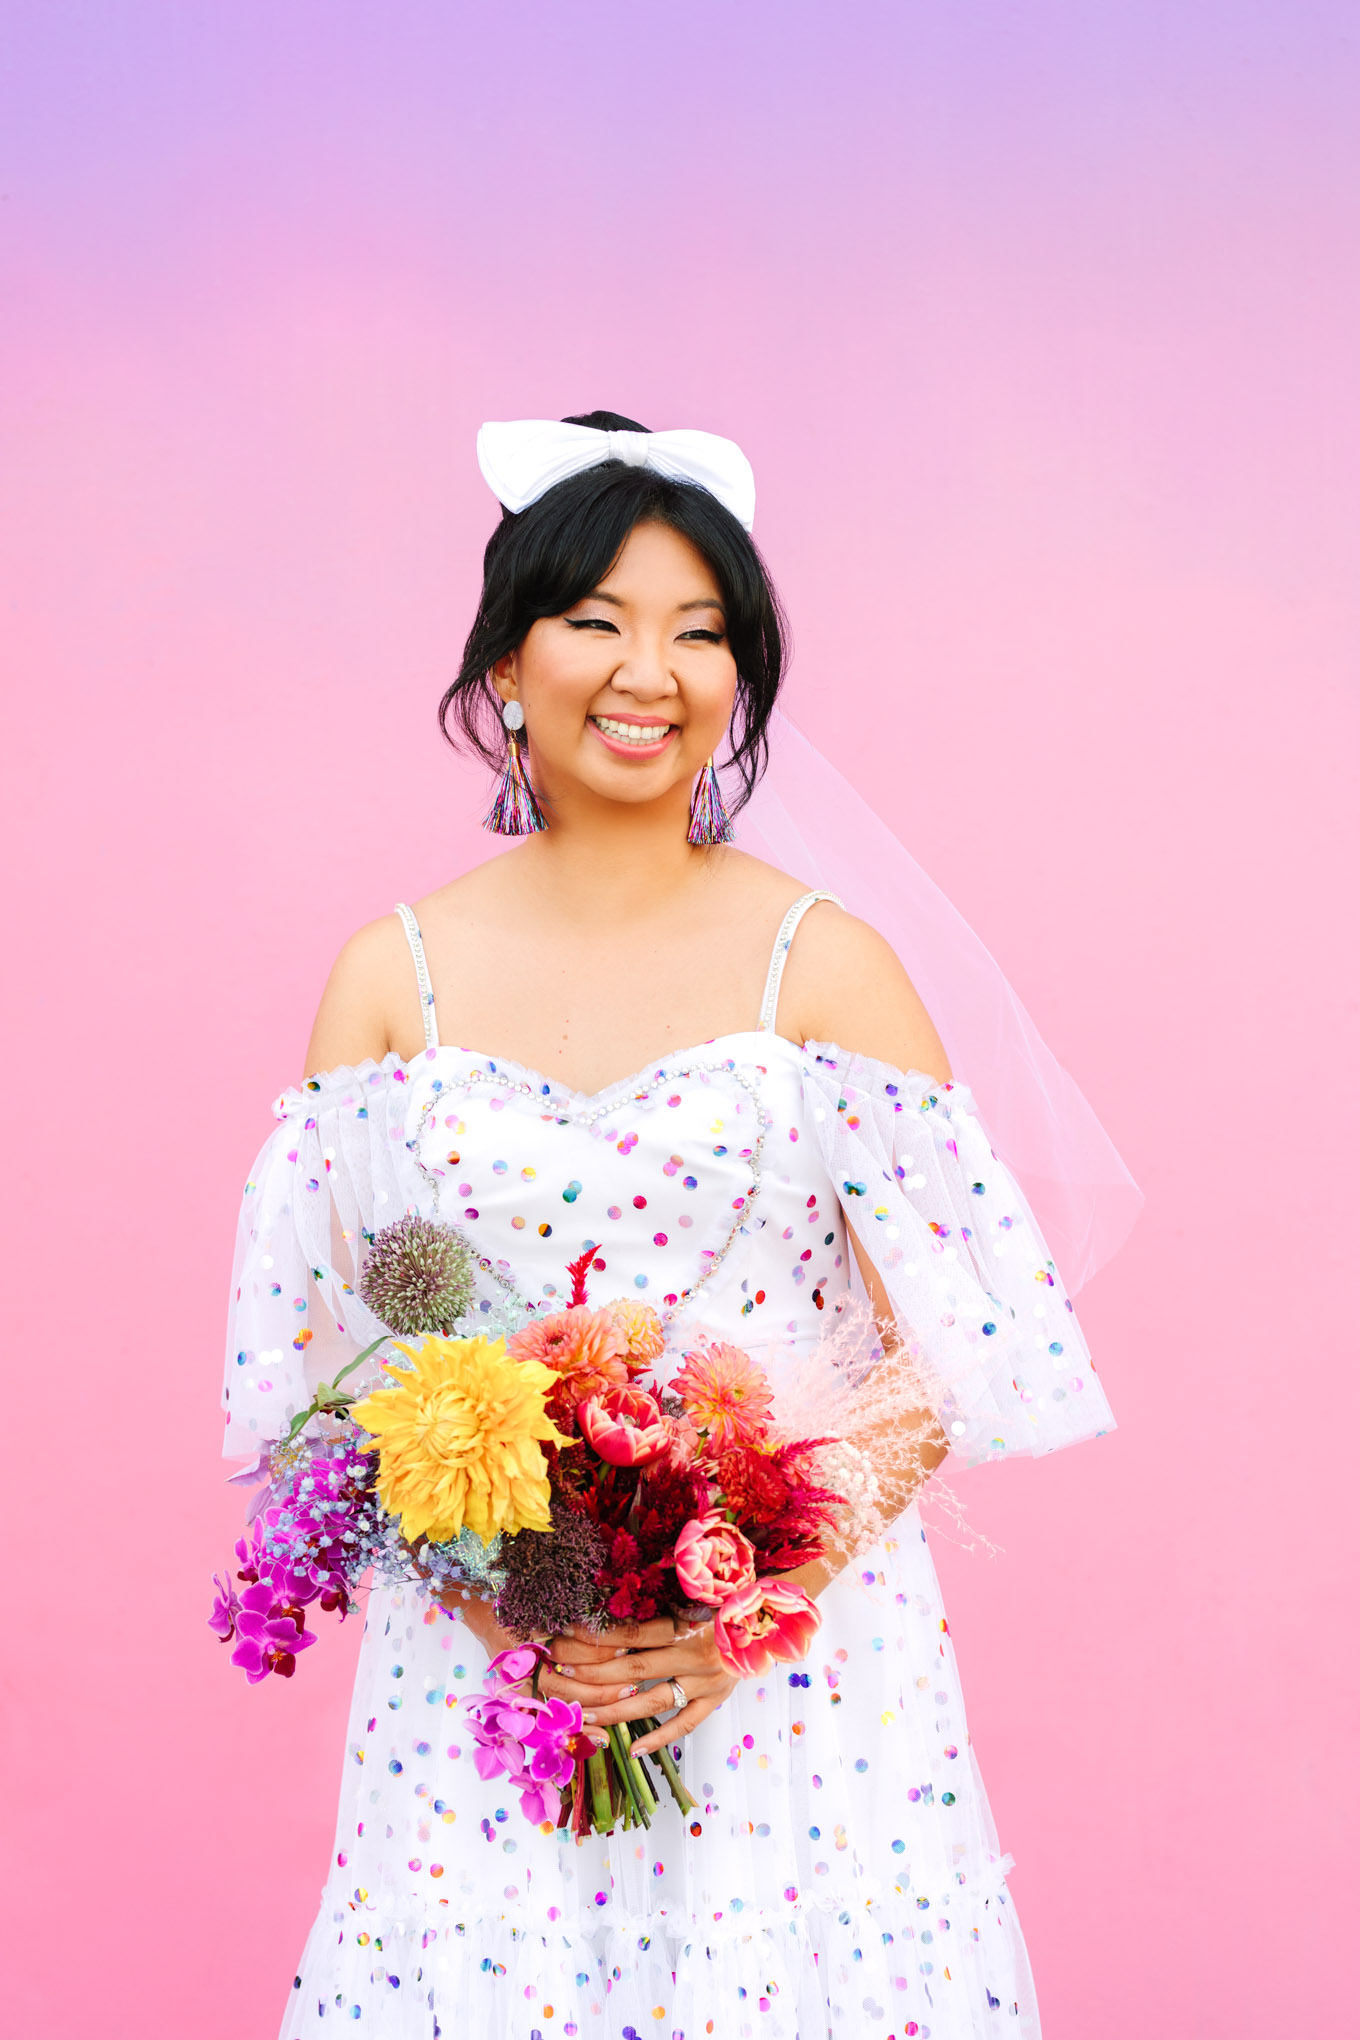 Bride in confetti dress with rainbow bouquet and hair bow | Engagement, elopement, and wedding photography roundup of Mary Costa’s favorite images from 2020 | Colorful and elevated photography for fun-loving couples in Southern California | #2020wedding #elopement #weddingphoto #weddingphotography #microwedding   Source: Mary Costa Photography | Los Angeles